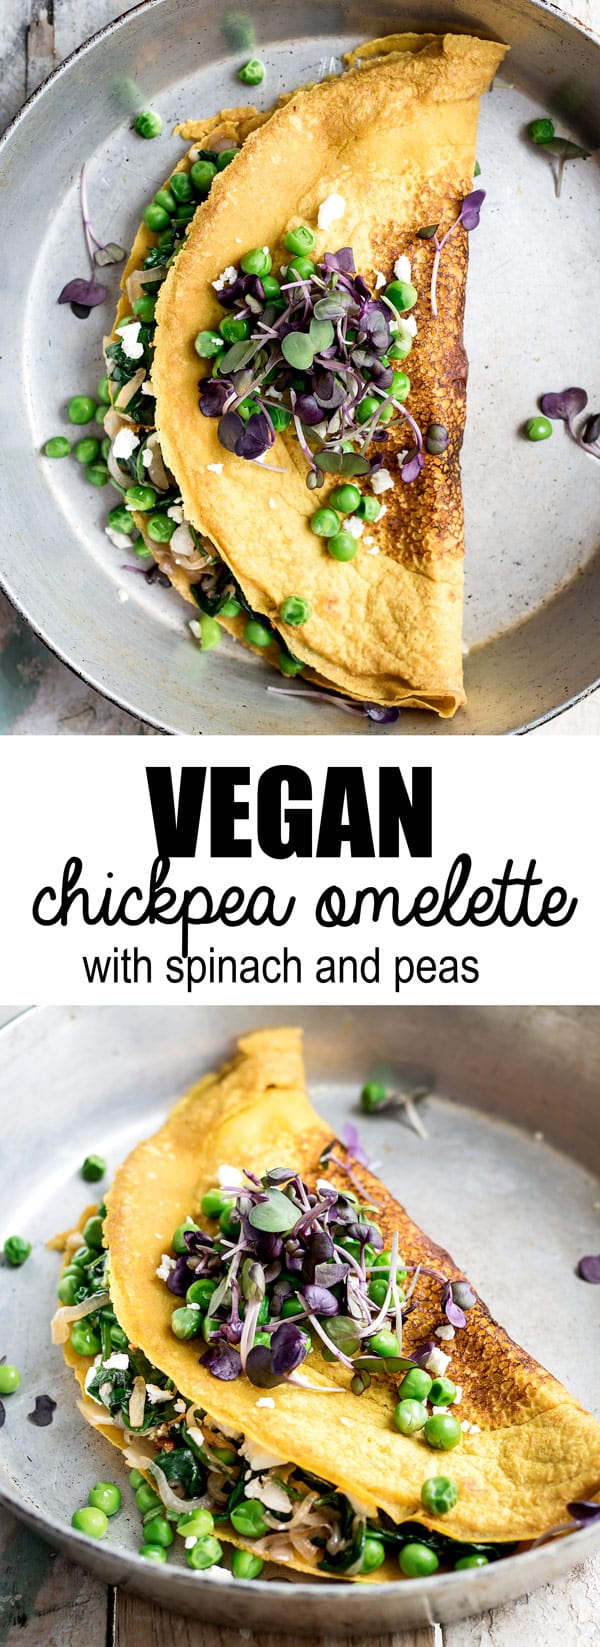 You won't believe how easy it is to make this chickpea omelette with spinach and spring peas! This vegan and gluten-free breakfast is made from chickpea flour for a healthy breakfast!